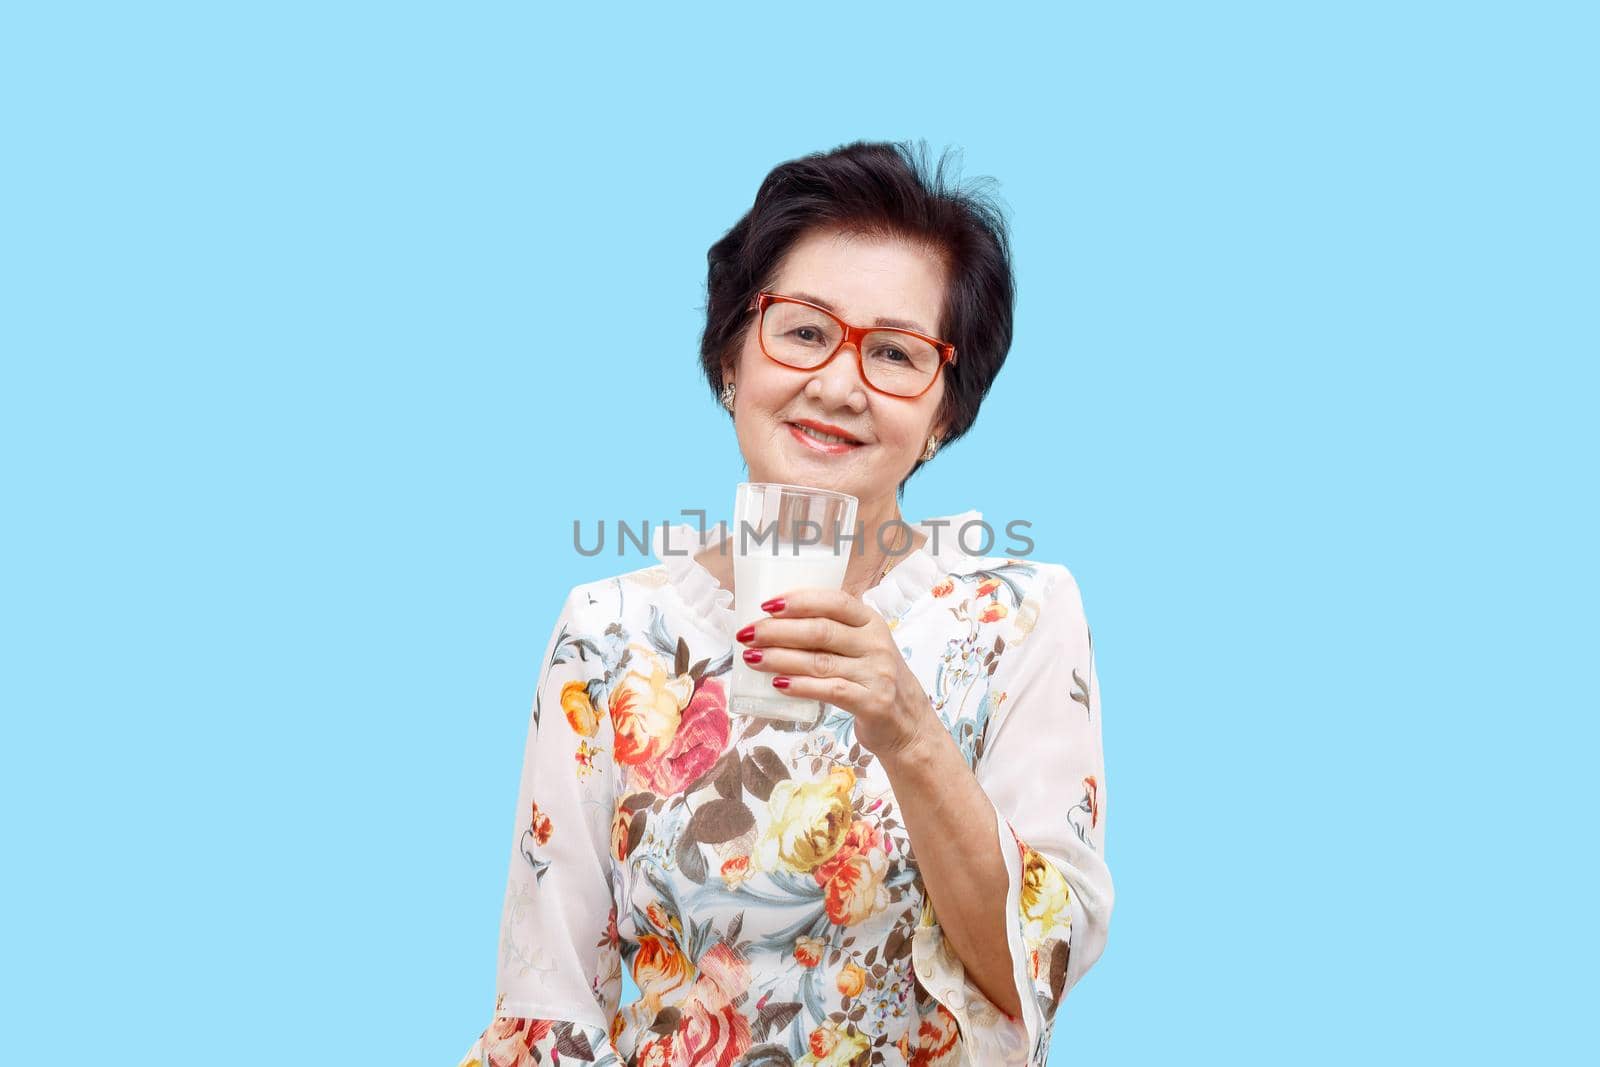 Senior woman holding a glass of milk , isolated on white background.